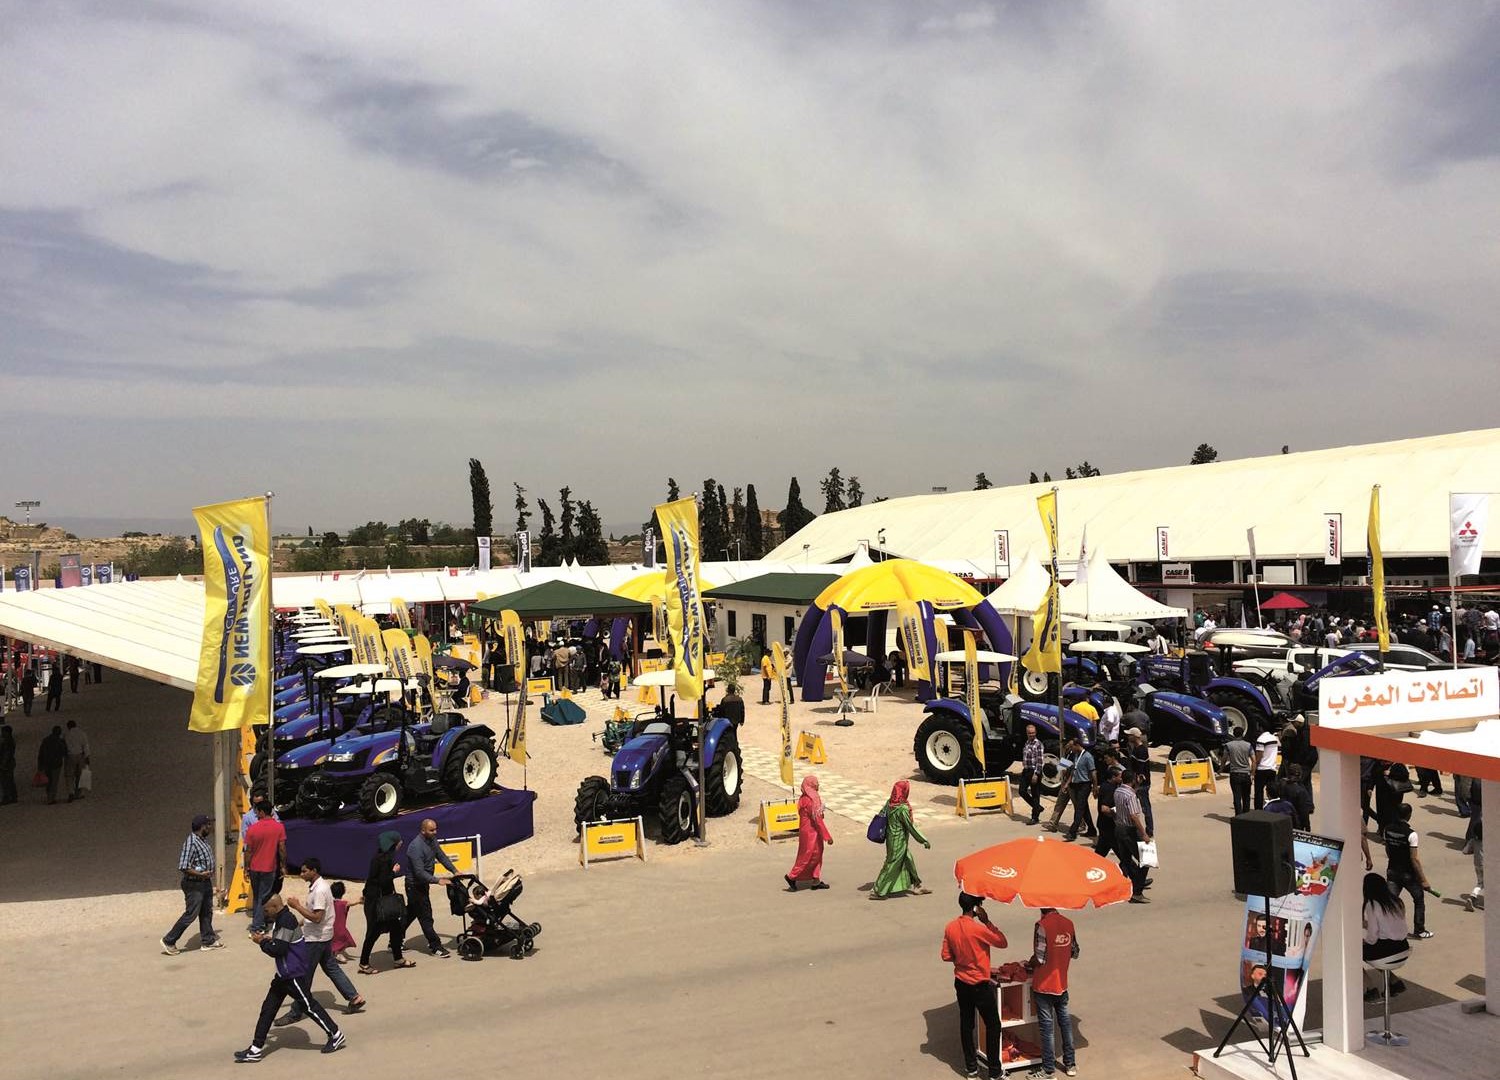 New Holland Agriculture presented its machinery to its one of the largest African audience during the SIAM 2017